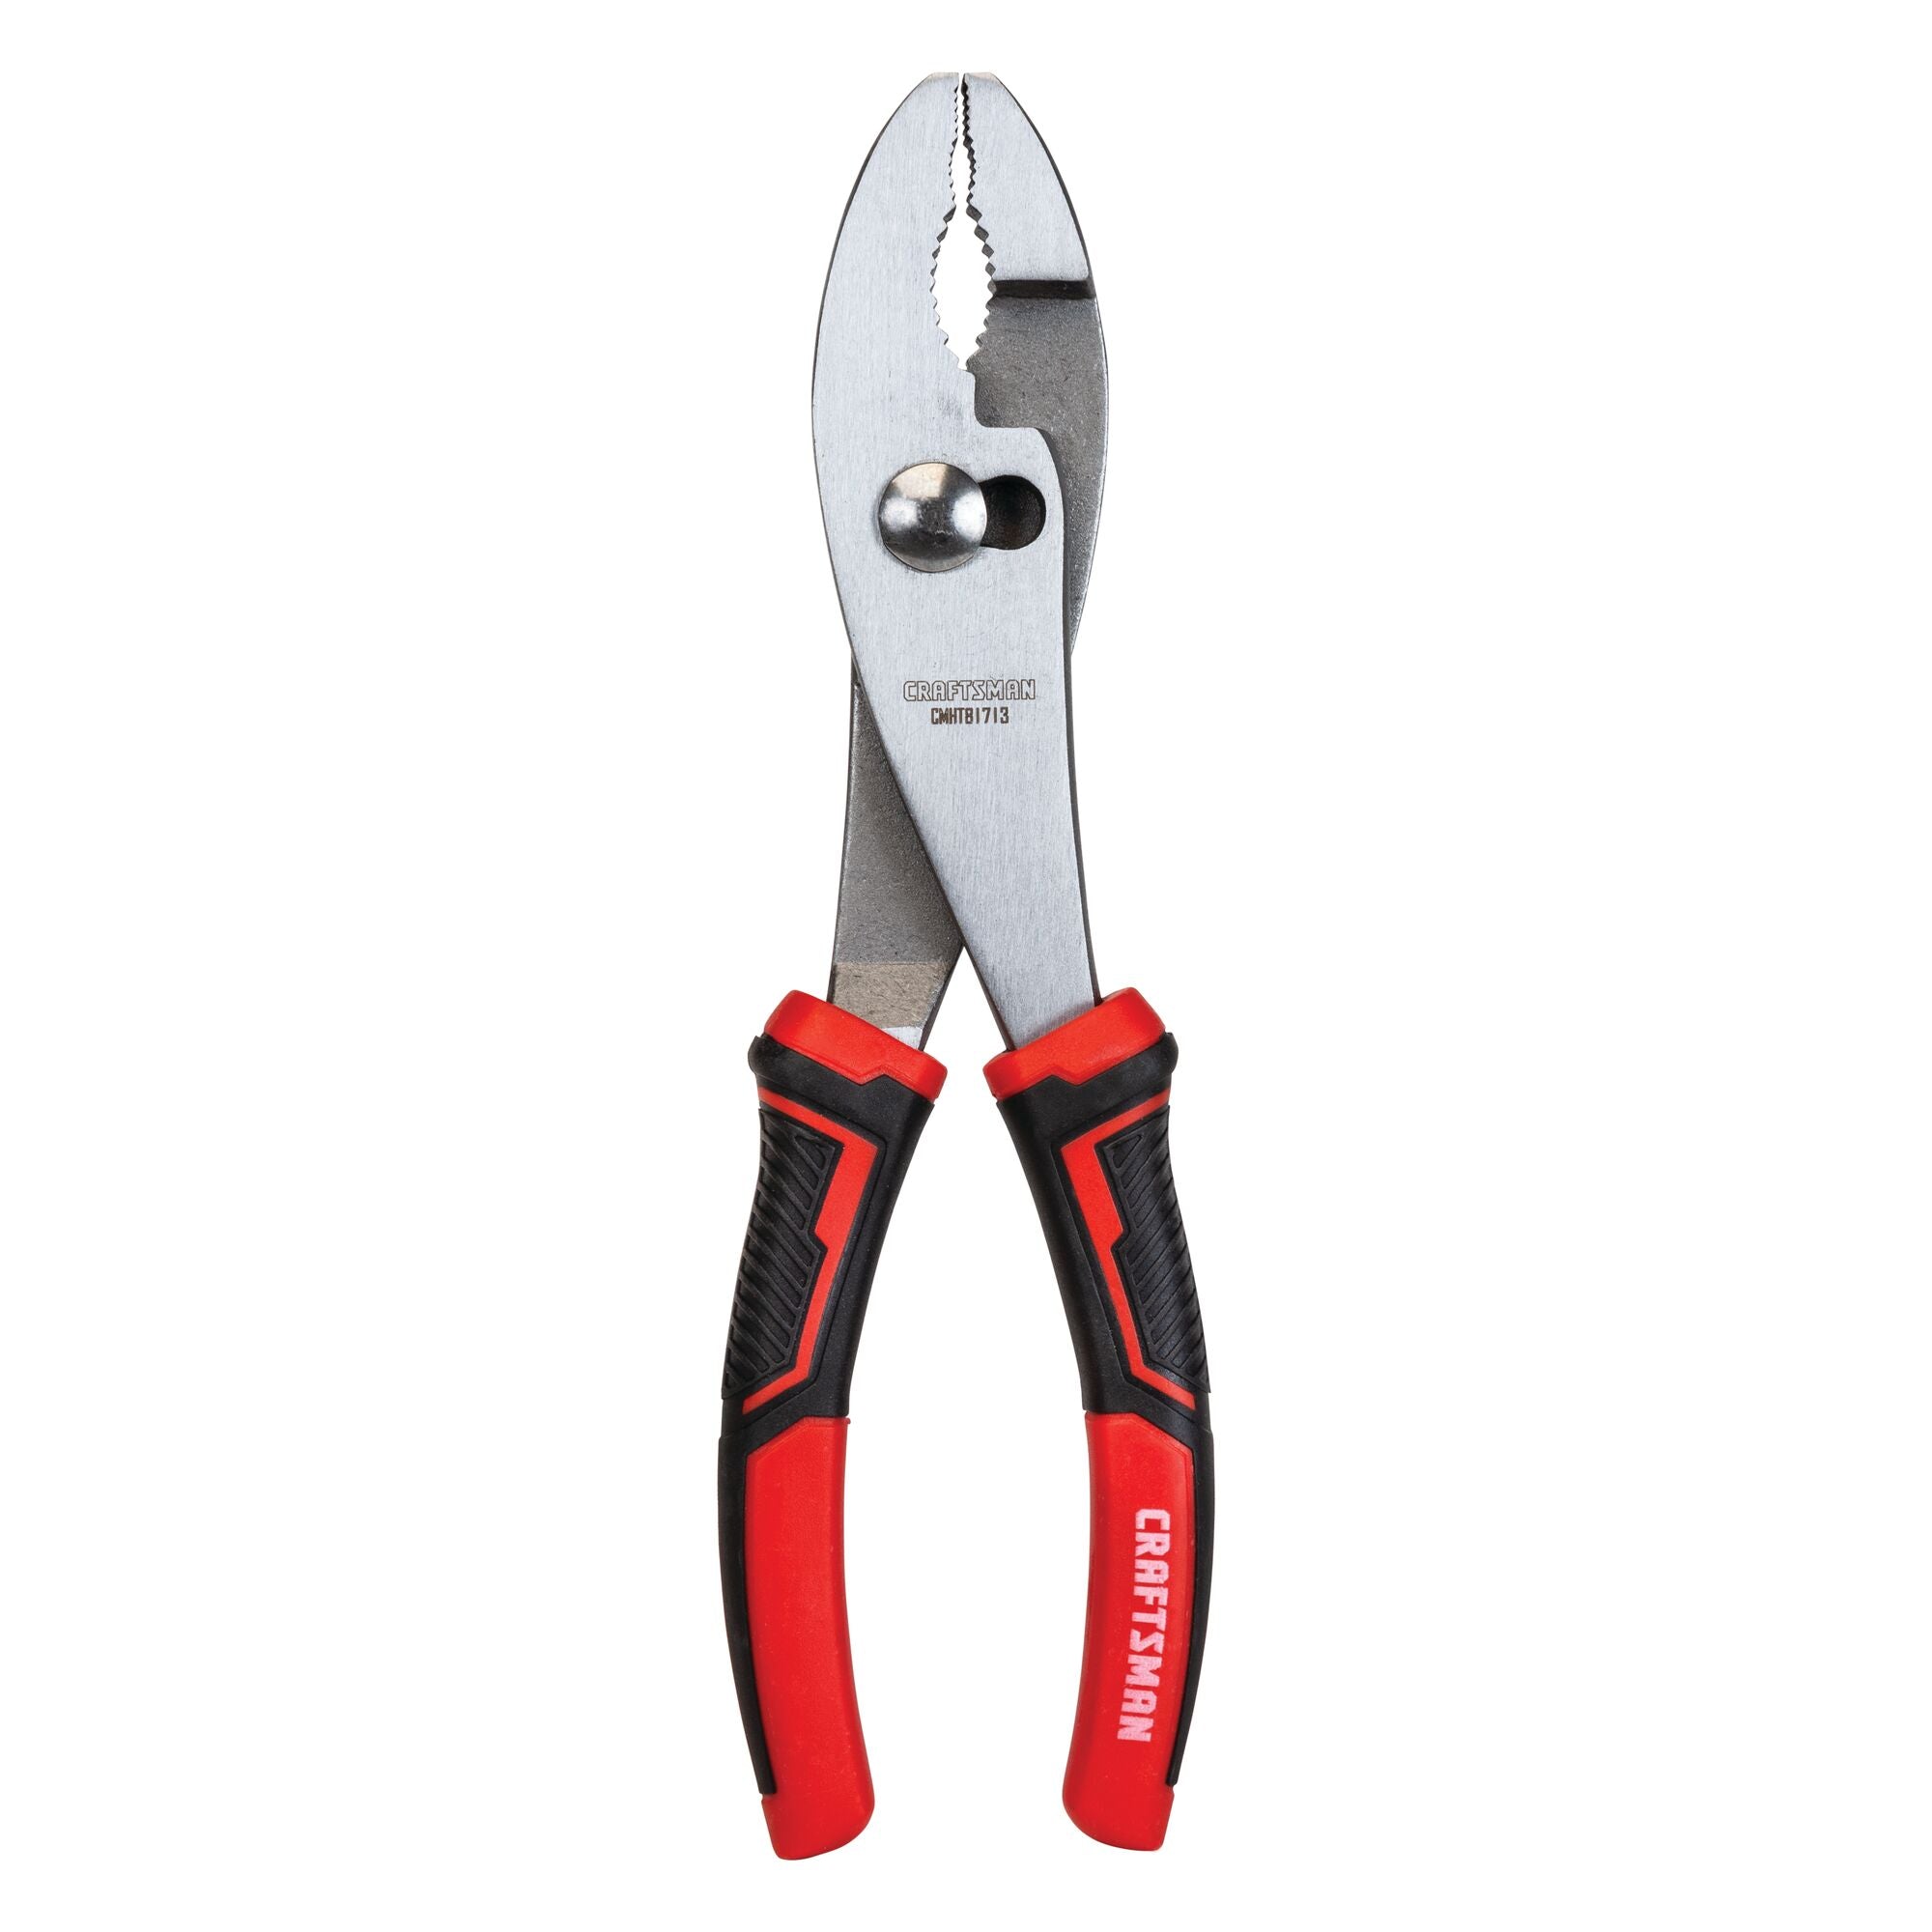 7 OAL, 1 Jaw Length, 3 Jaw Width, Slip Joint Pliers - The Office Group